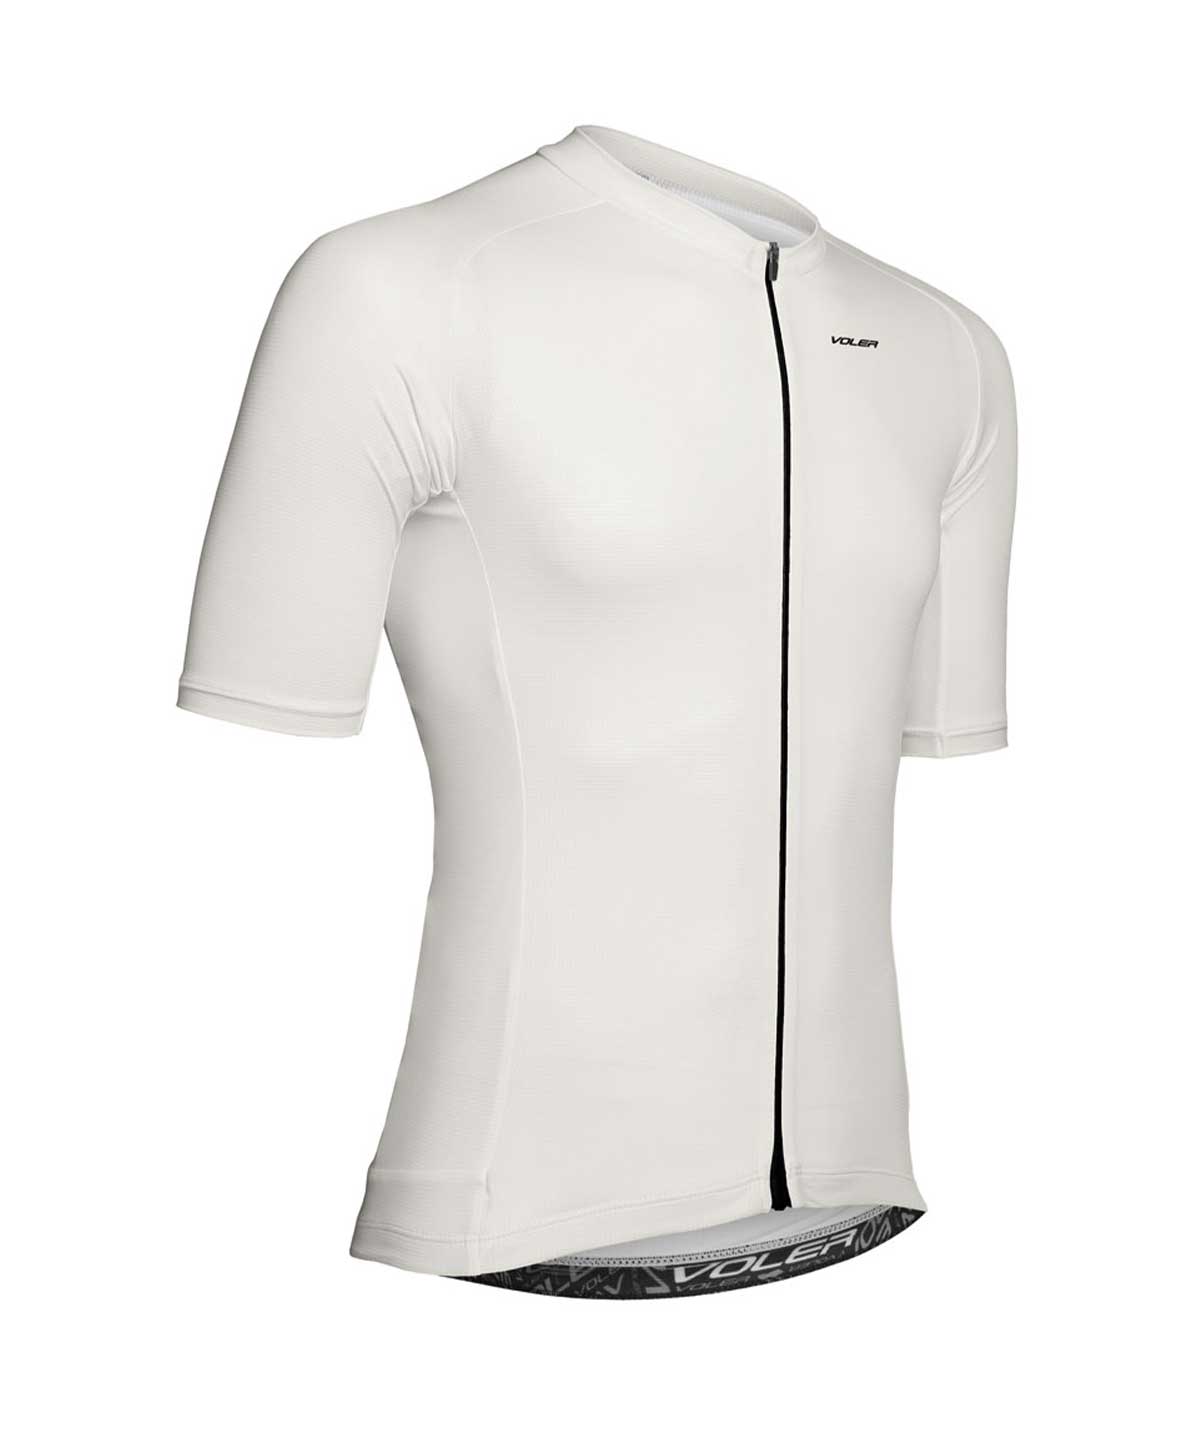 M. VELOCITY AIR JERSEY - SOLID